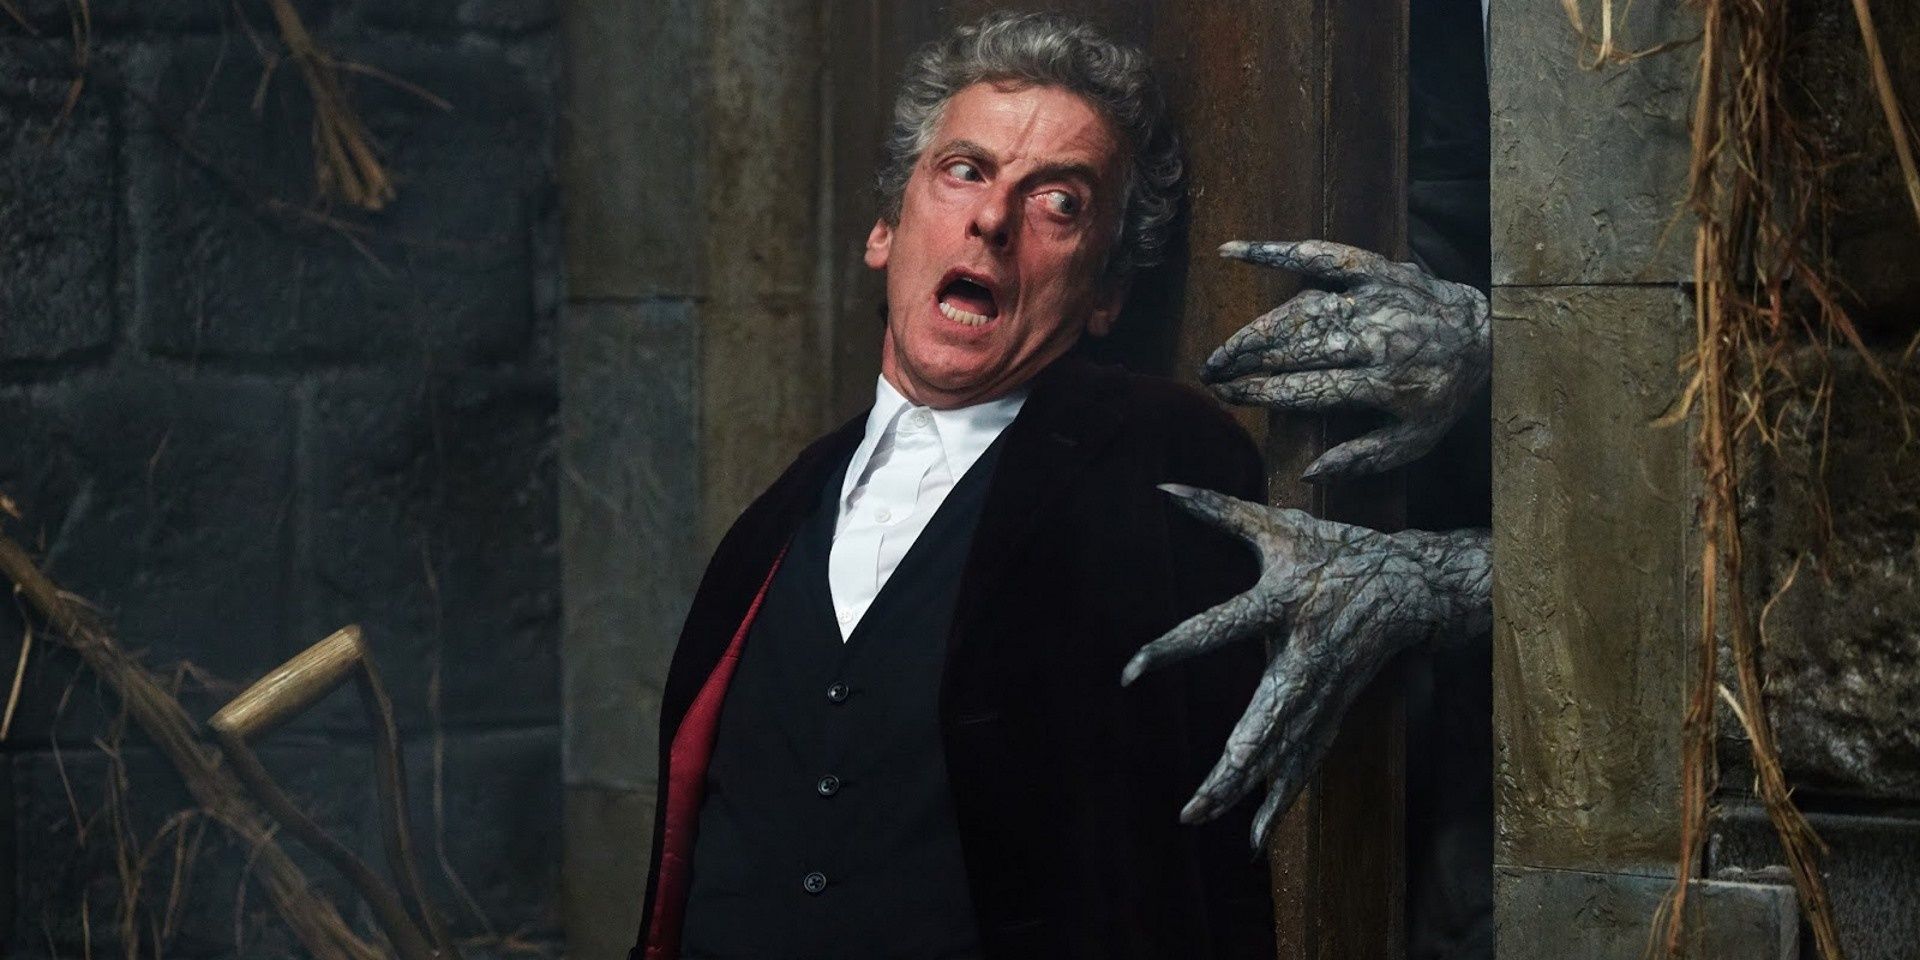 The Twelfth Doctor putting pressure on the door to keep out the veiled monster 